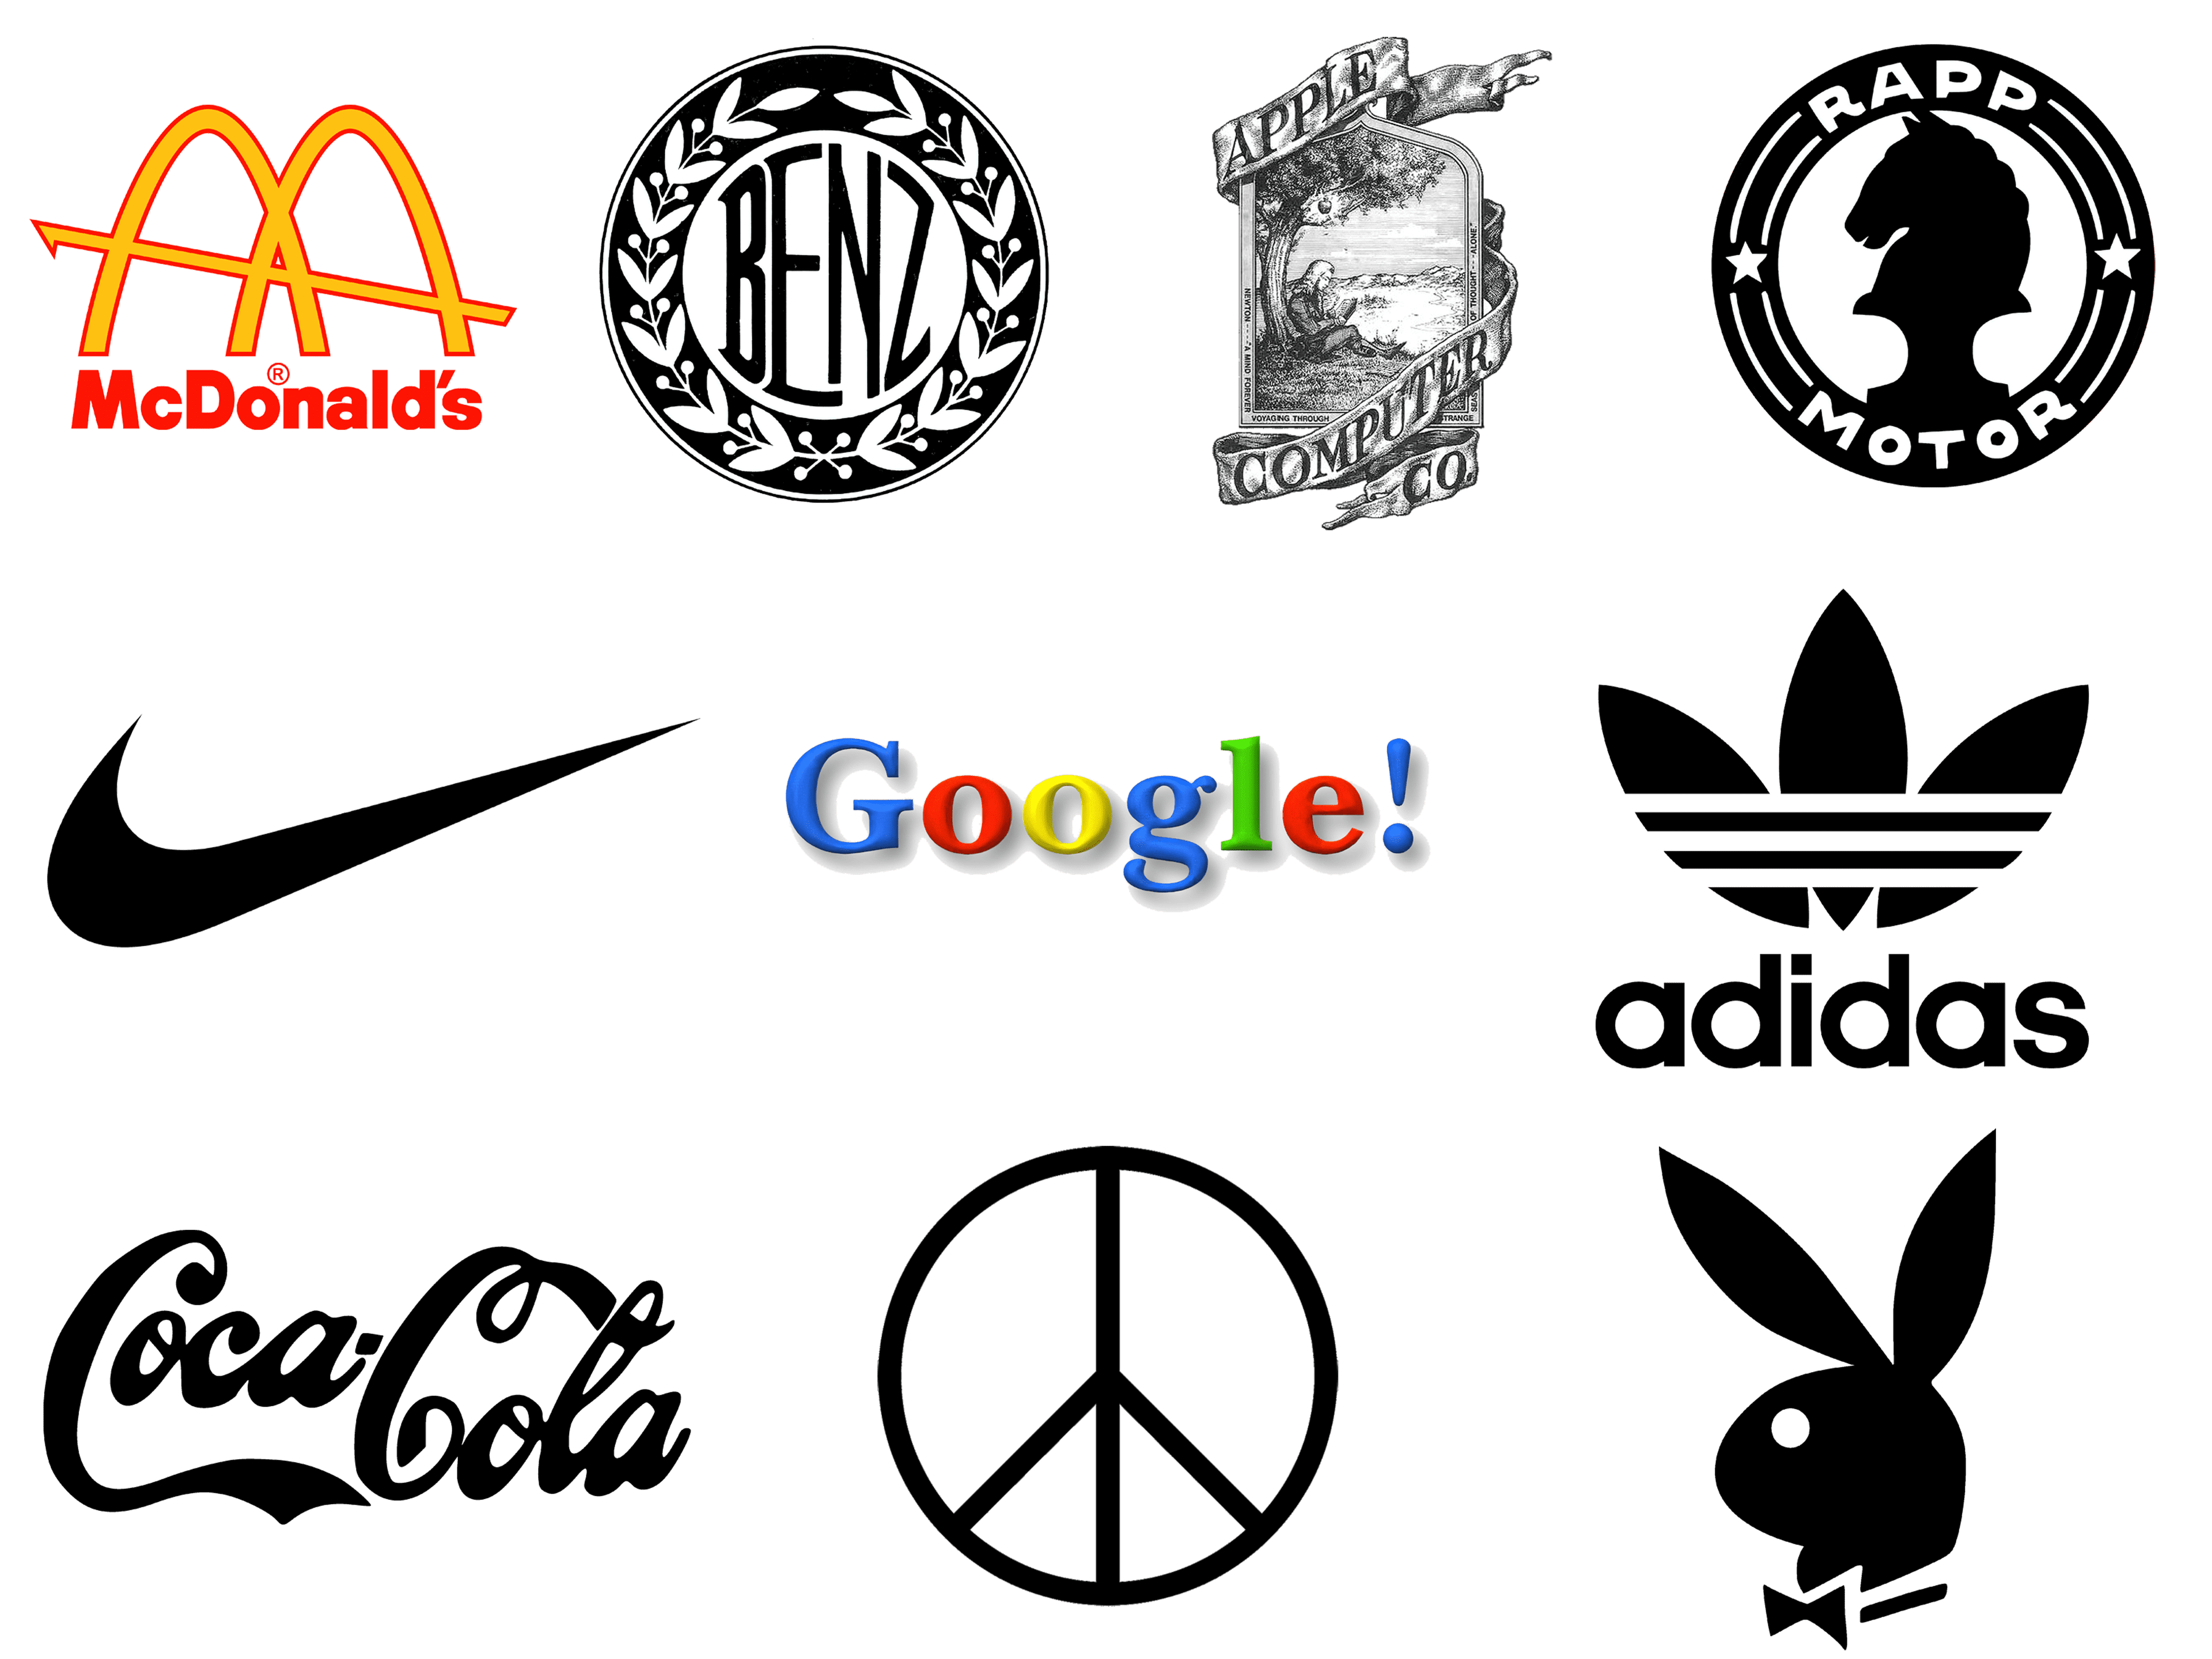 1000 Logos - The Famous Brands and Company Logos in the World